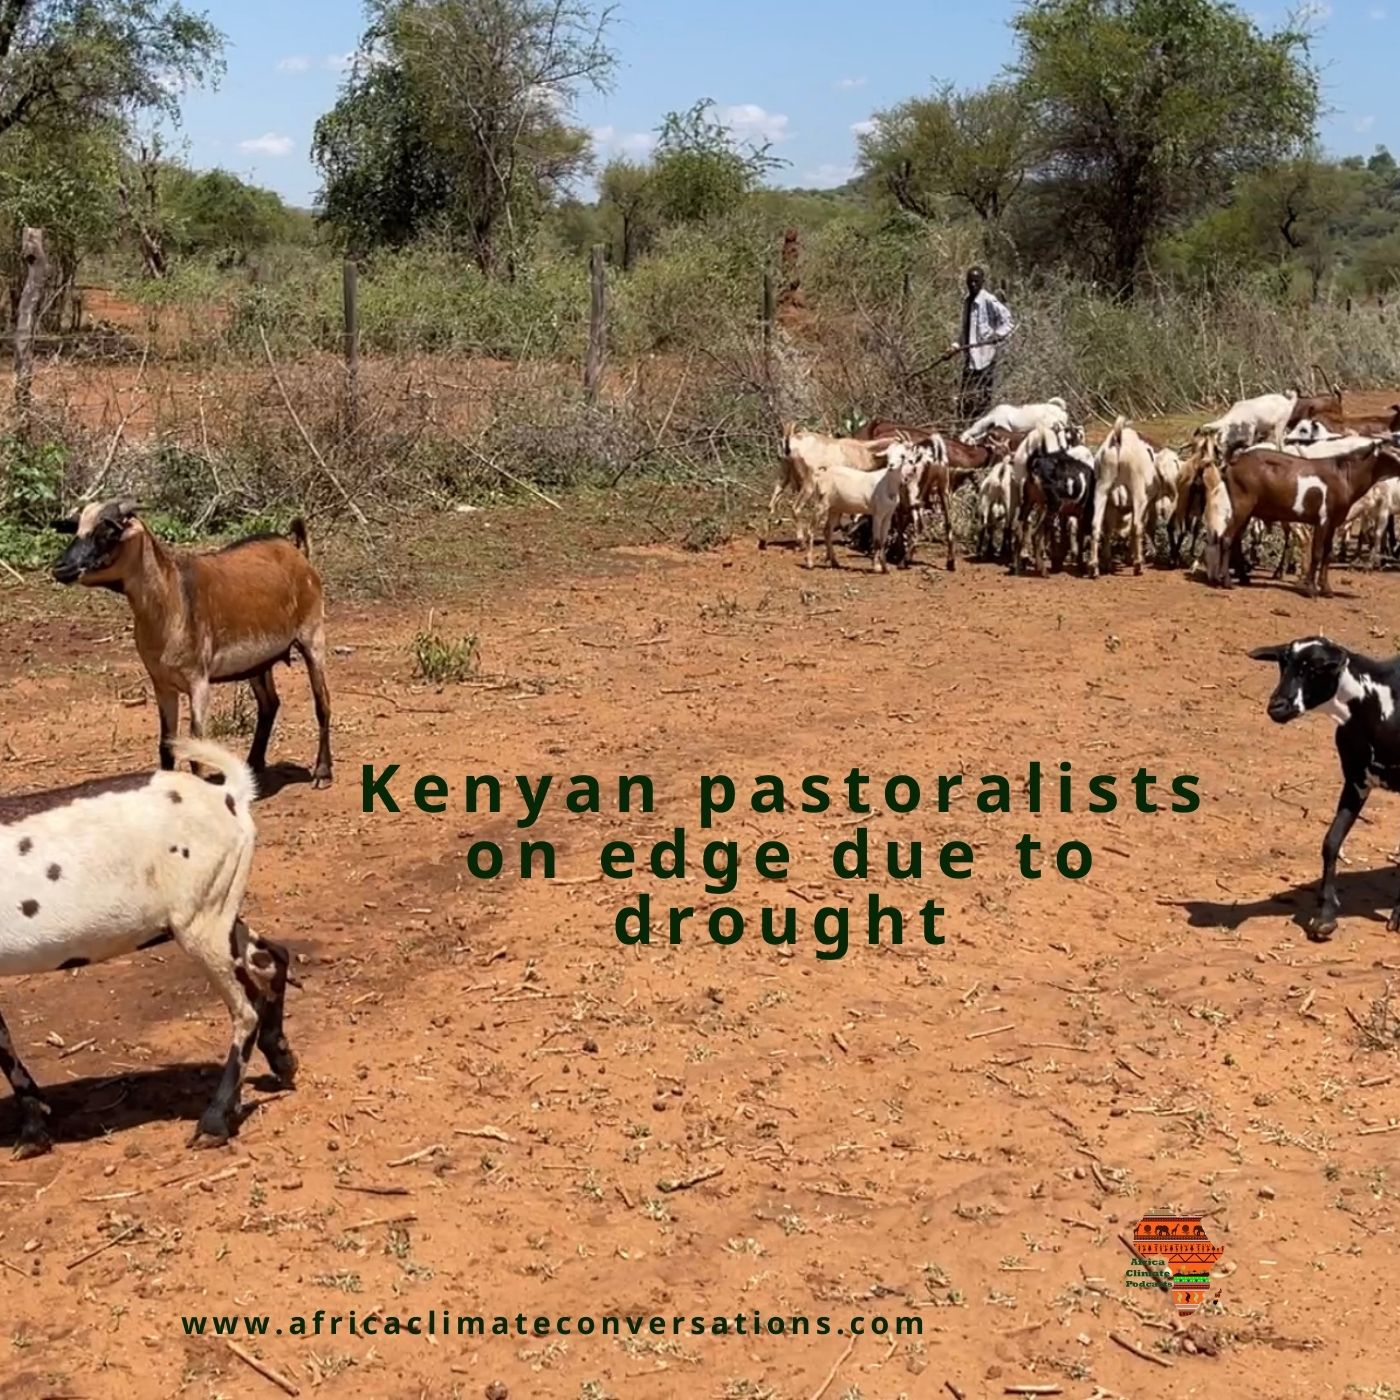 Kenyan pastoralists on edge due to drought.